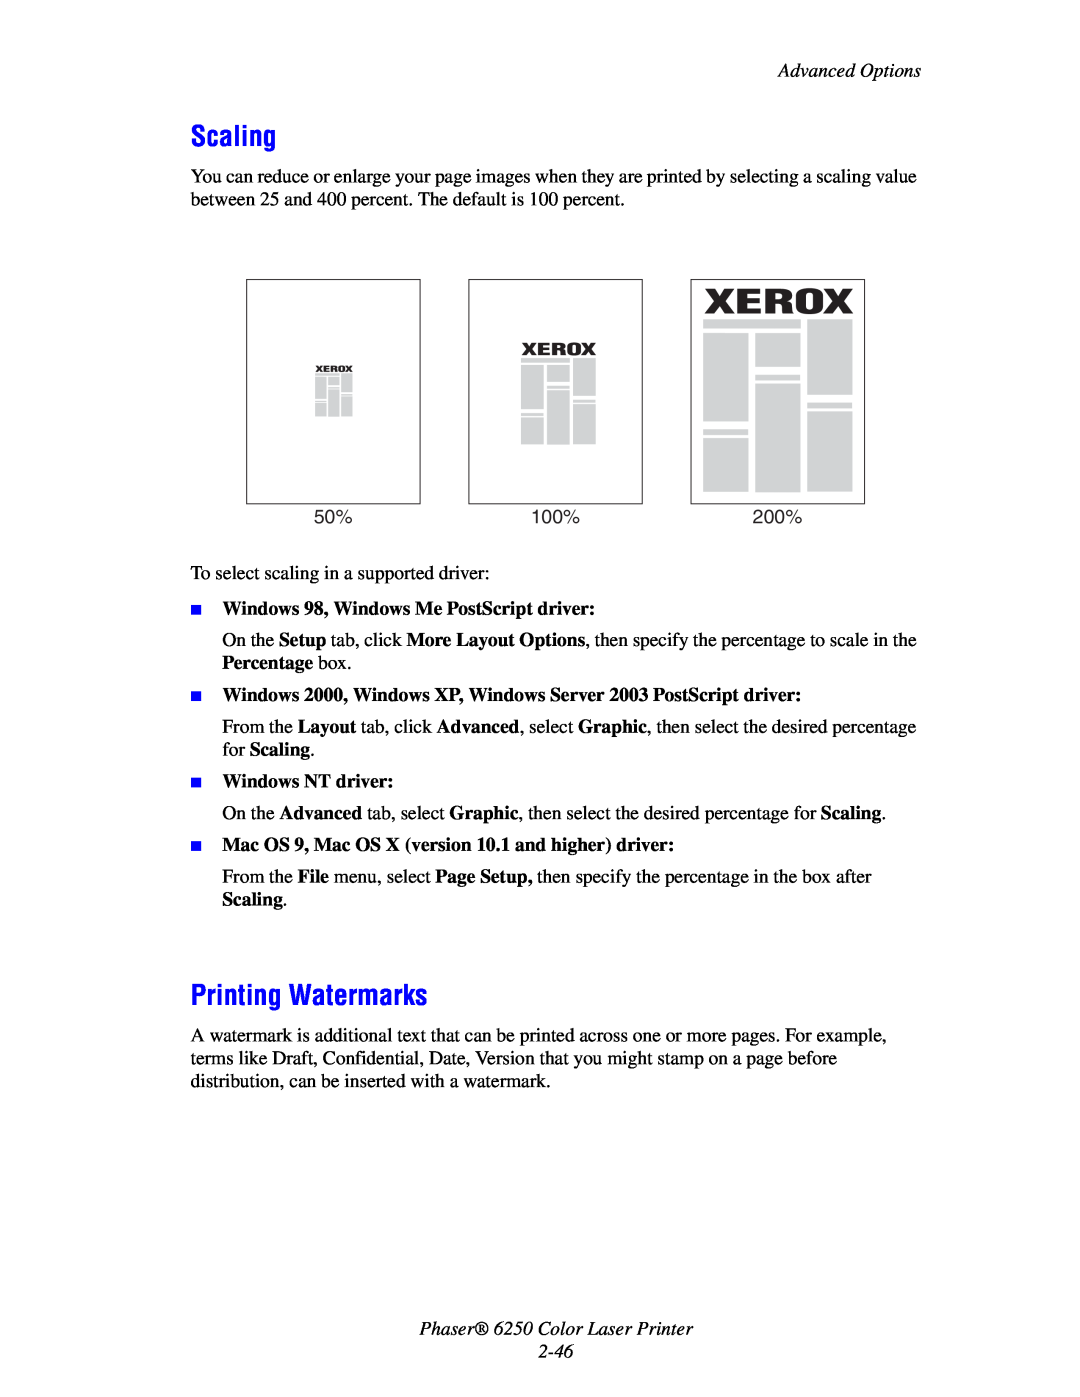 Xerox 6250 manual Scaling, Printing Watermarks, Mac OS 9, Mac OS X version 10.1 and higher driver, Advanced Options 